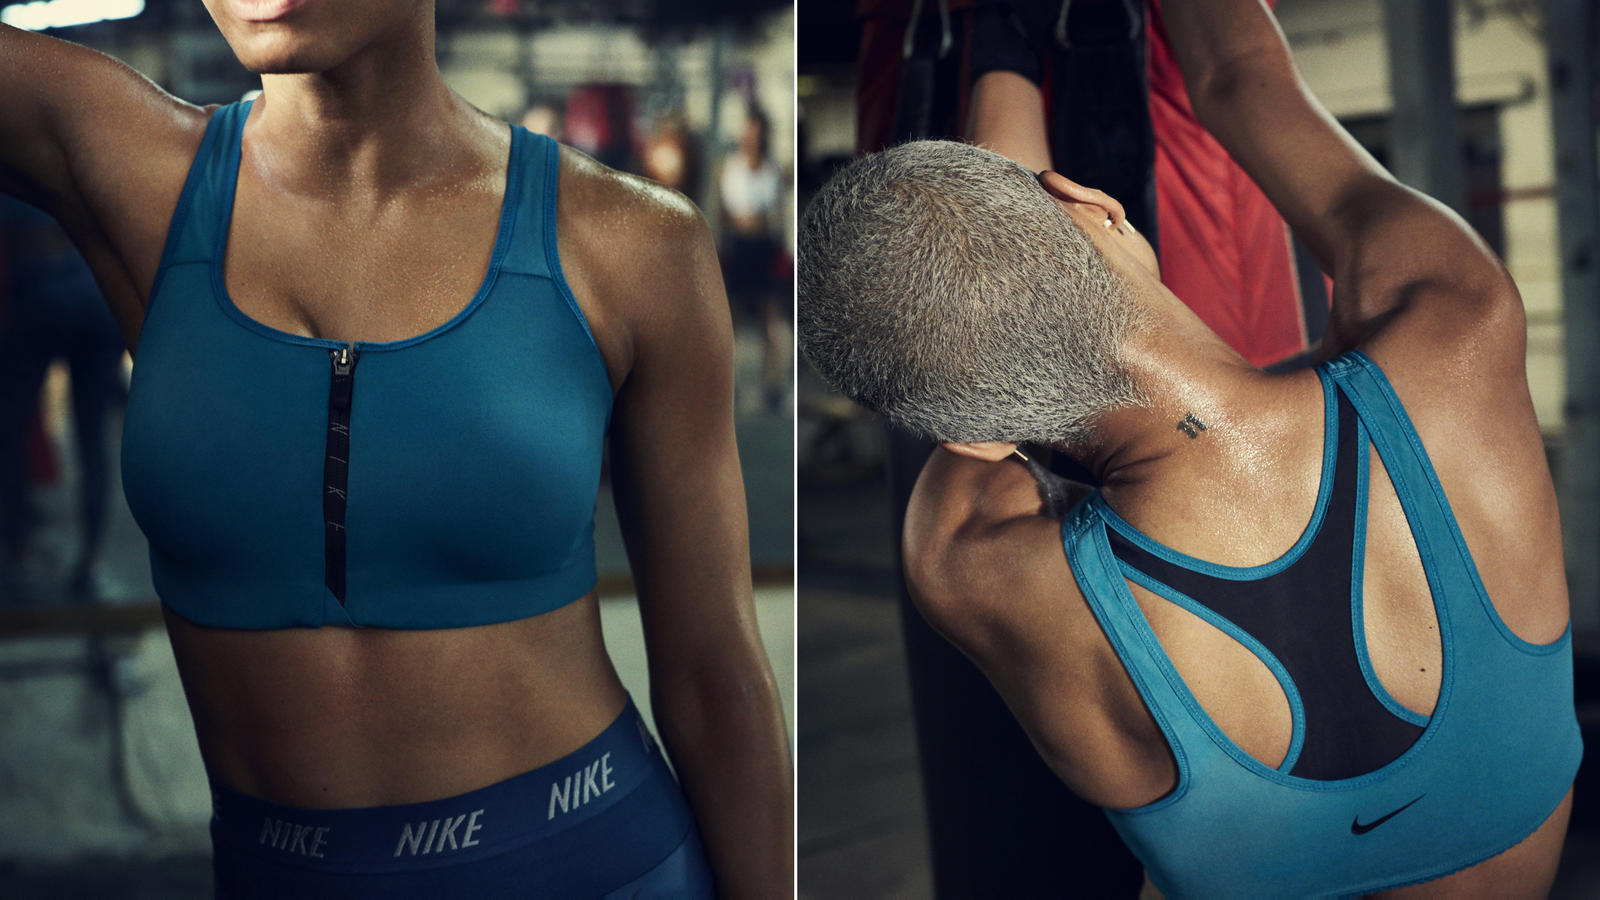 Nike Zip Bra offers interior molded cups combined with a compression overlay to provide support via encapsulation and compression. © Nike